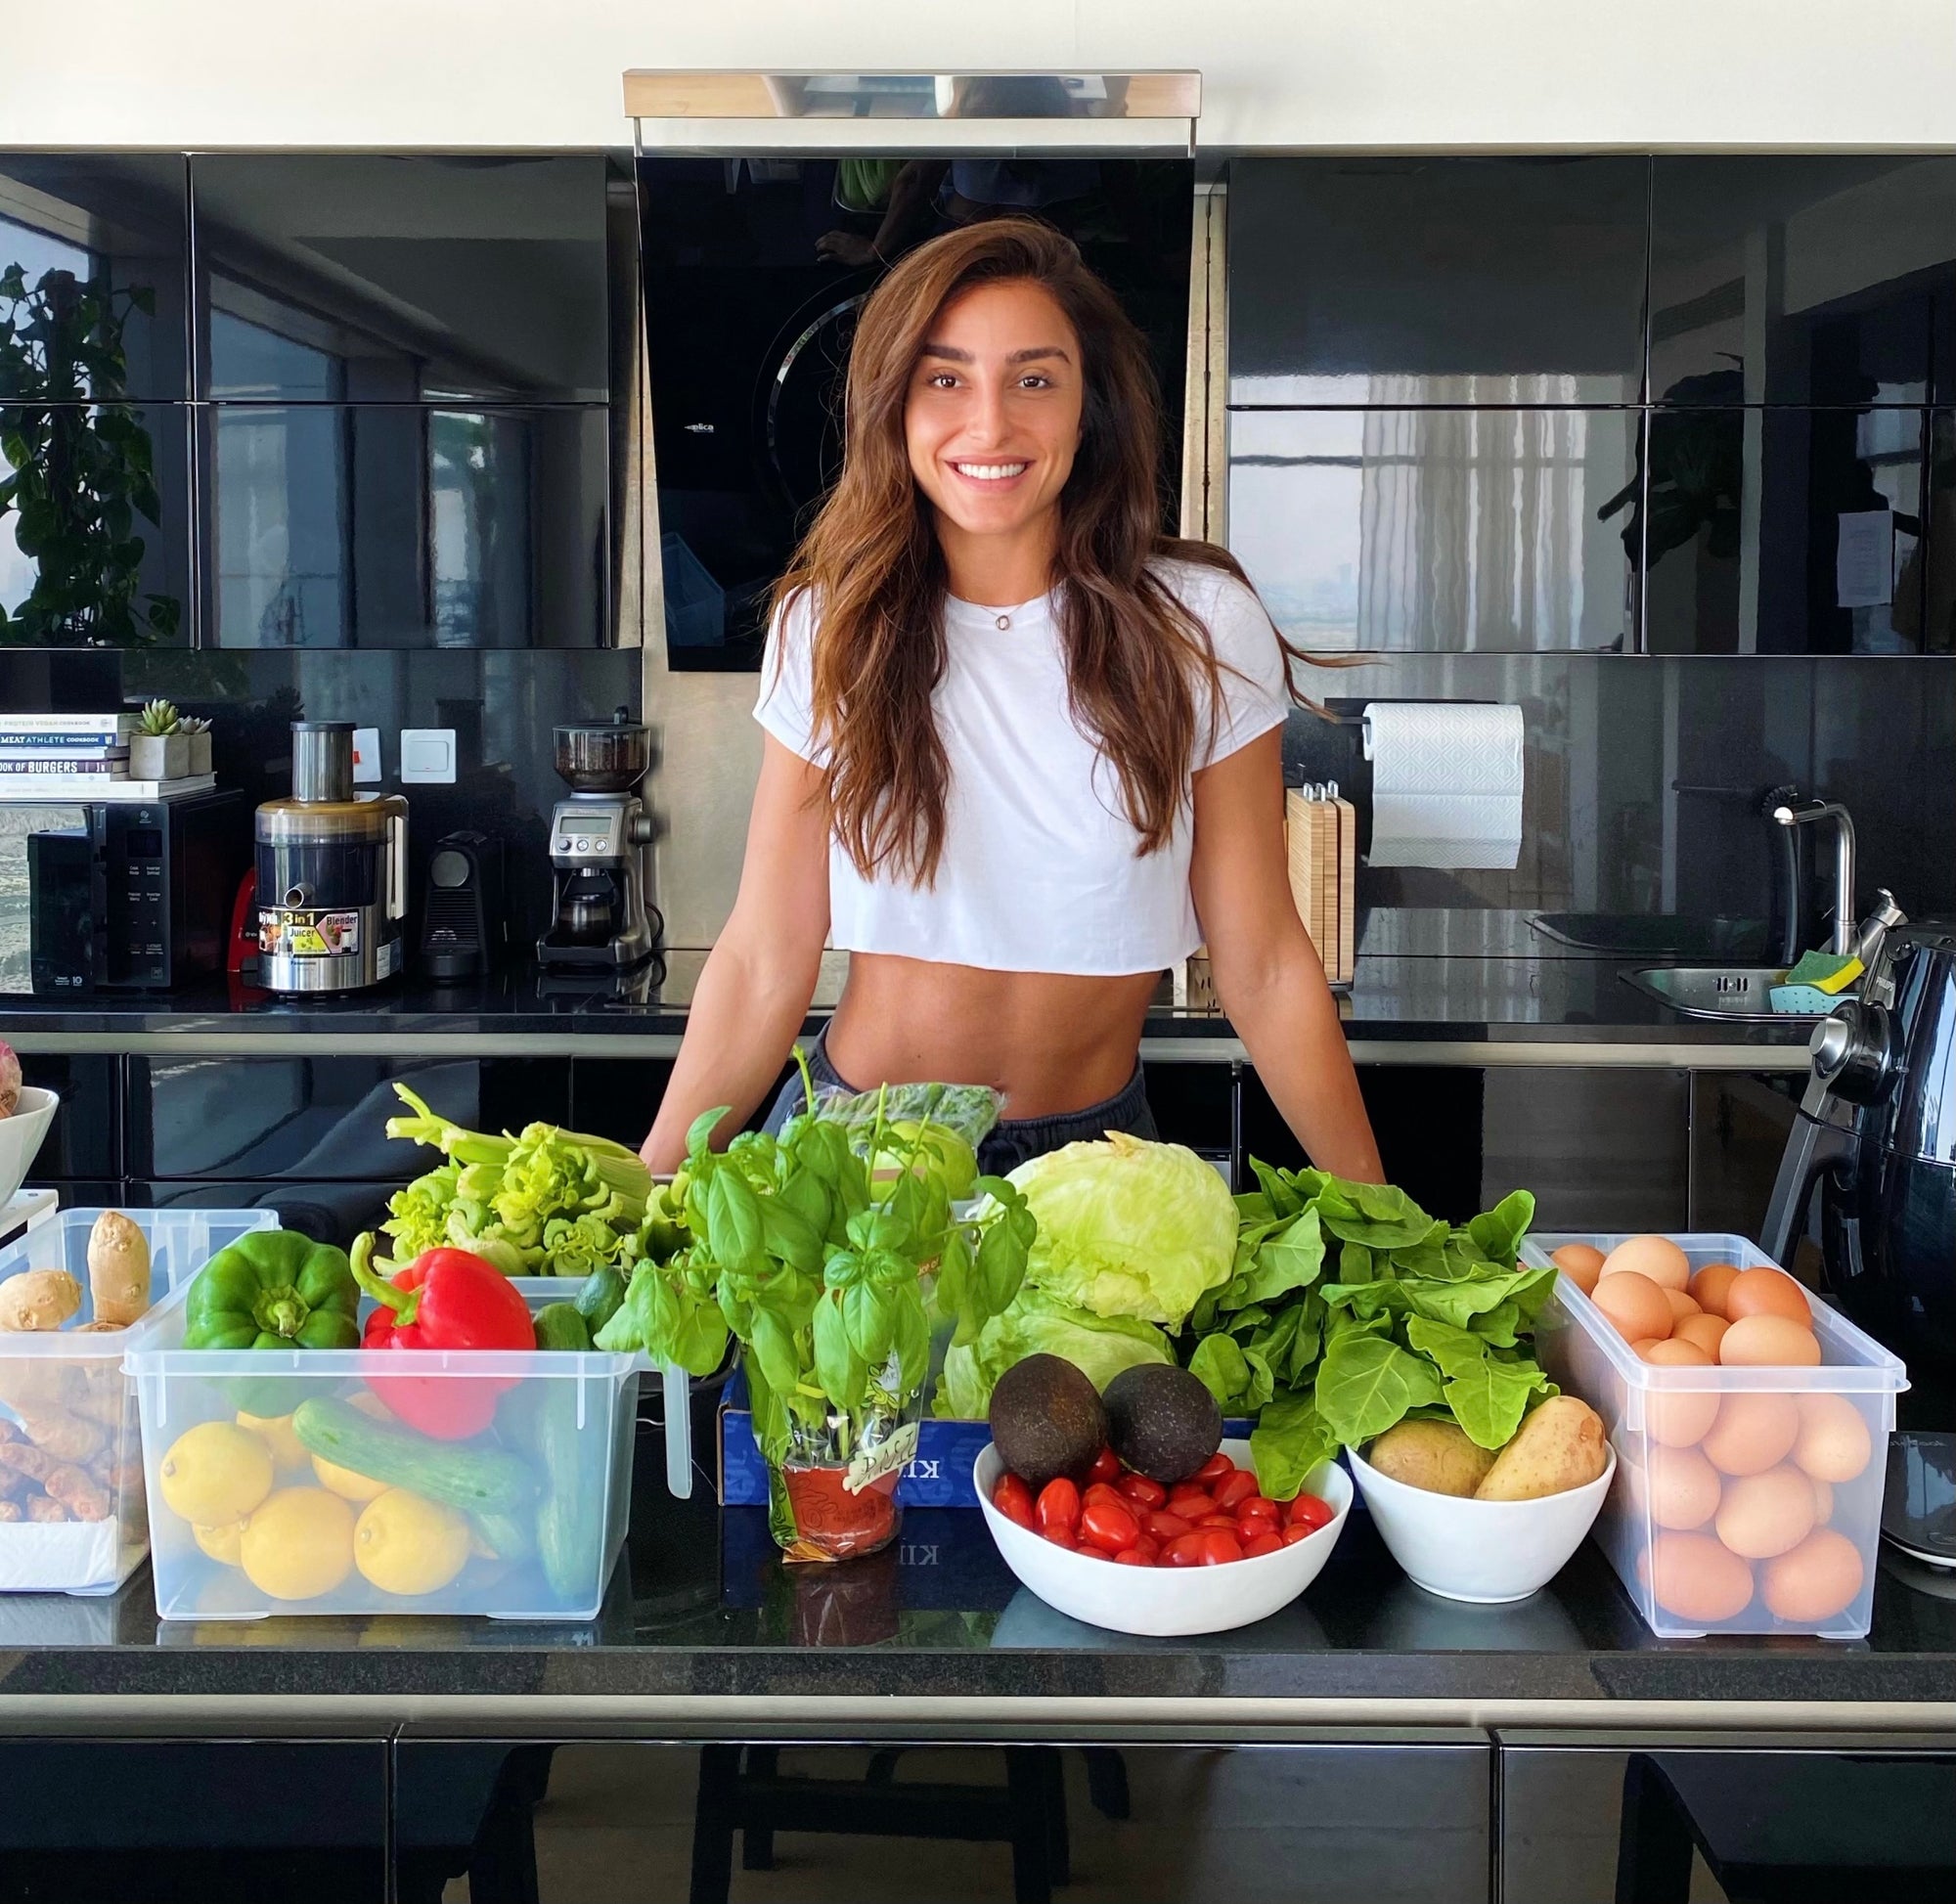 Tracy Harmoush Diet Plan Based on Your Macros